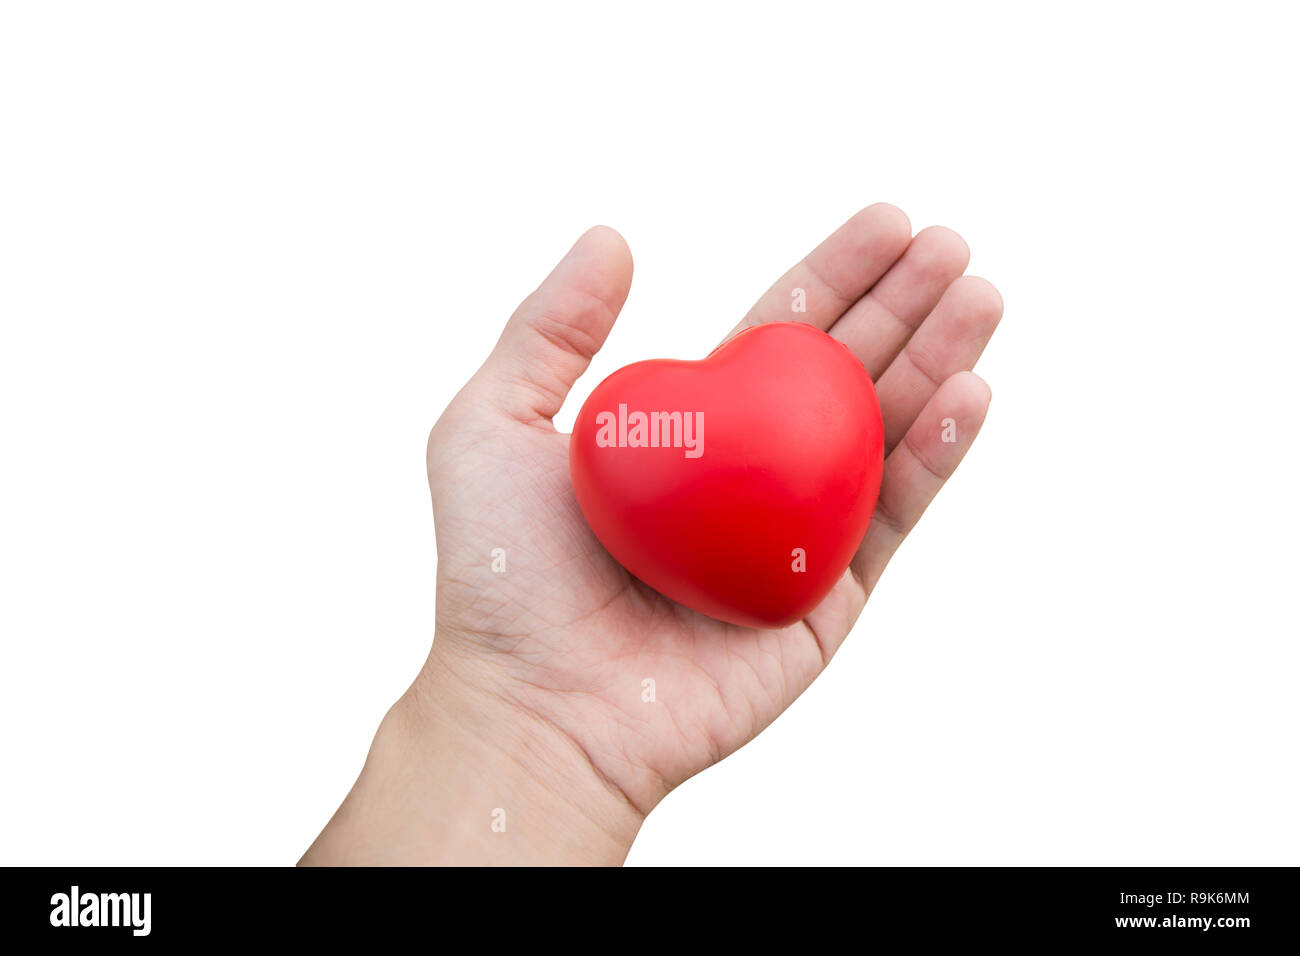 Red heart ball : Stress reliever foam ball the red heart shape on woman hand isolated on white background with clipping path Stock Photo